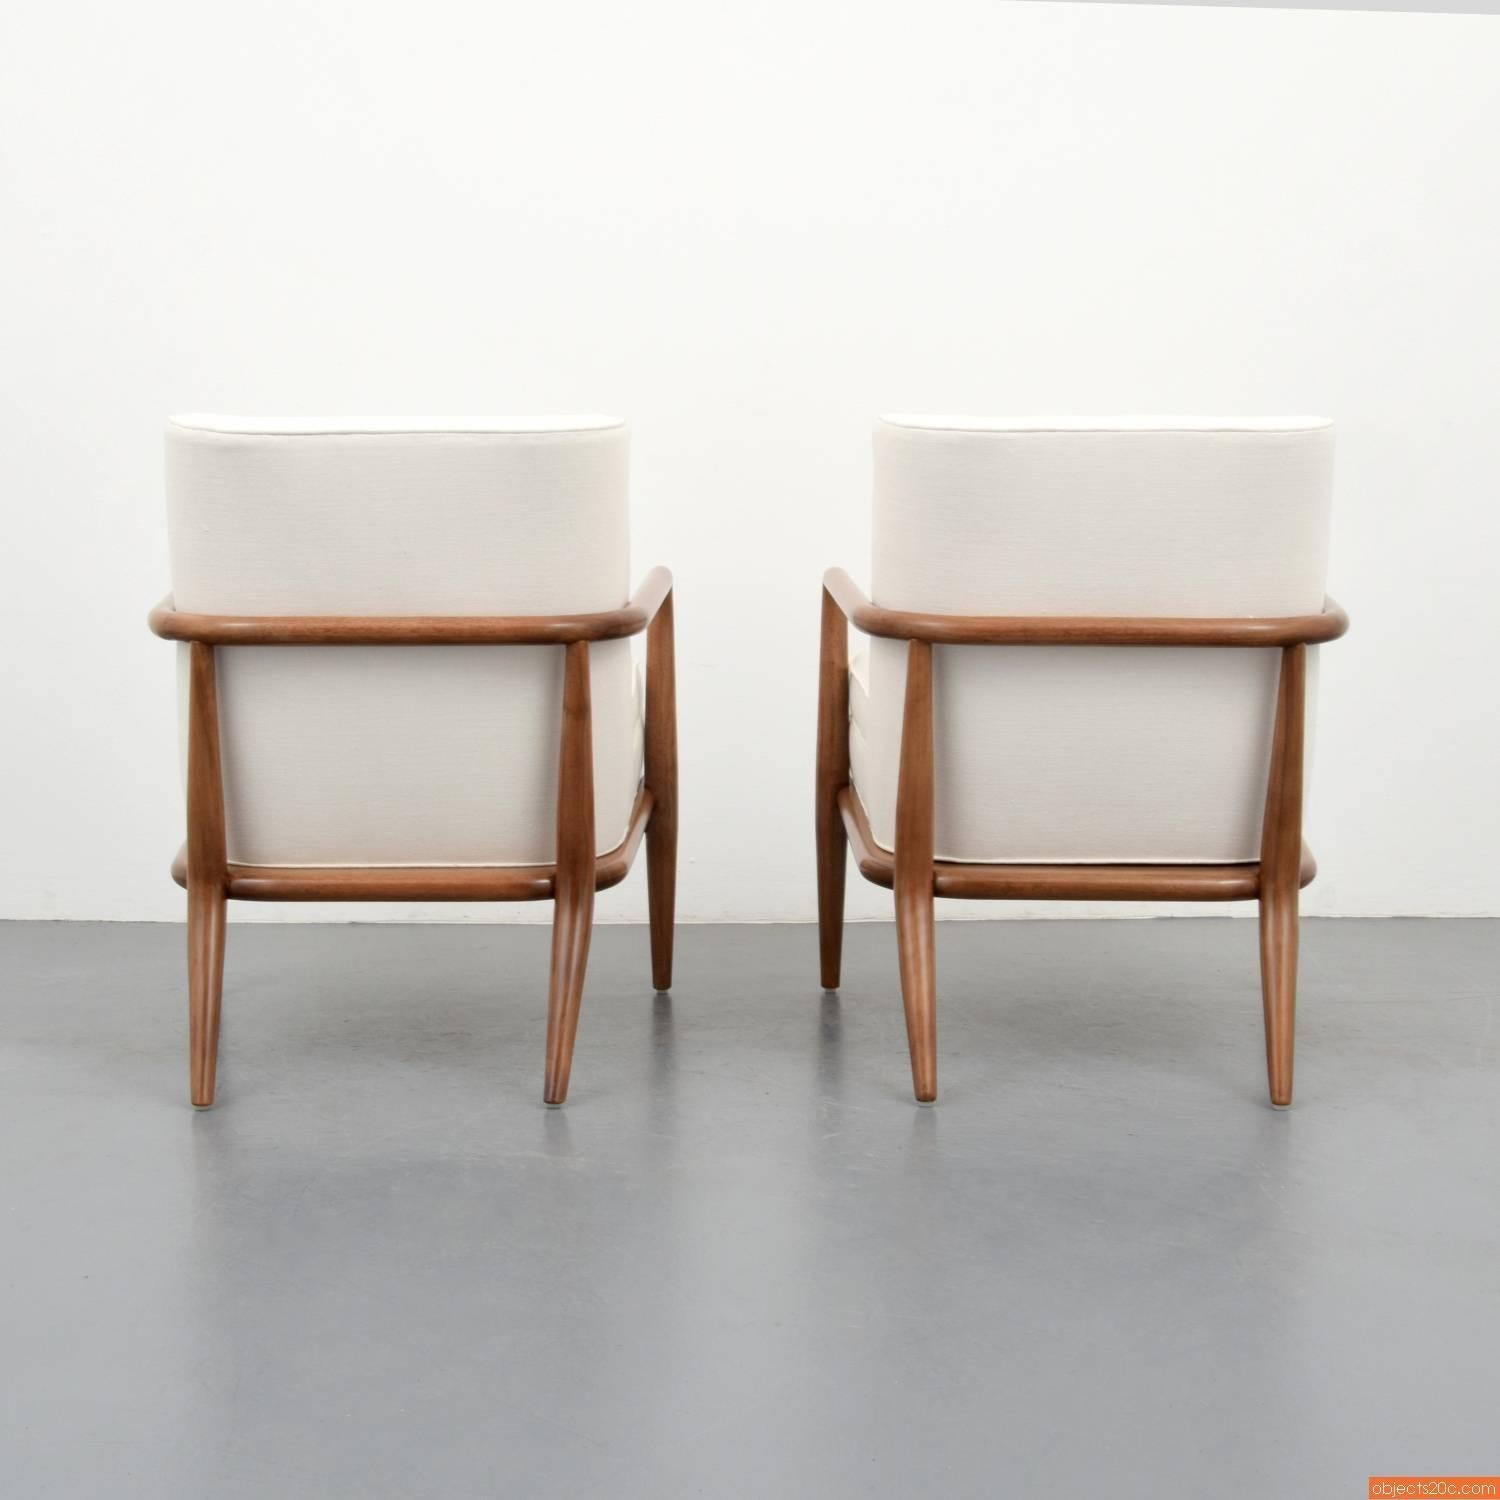 North American Pair of T.H. Robsjohn-Gibbings Lounge or Armchairs, Commissioned For Sale